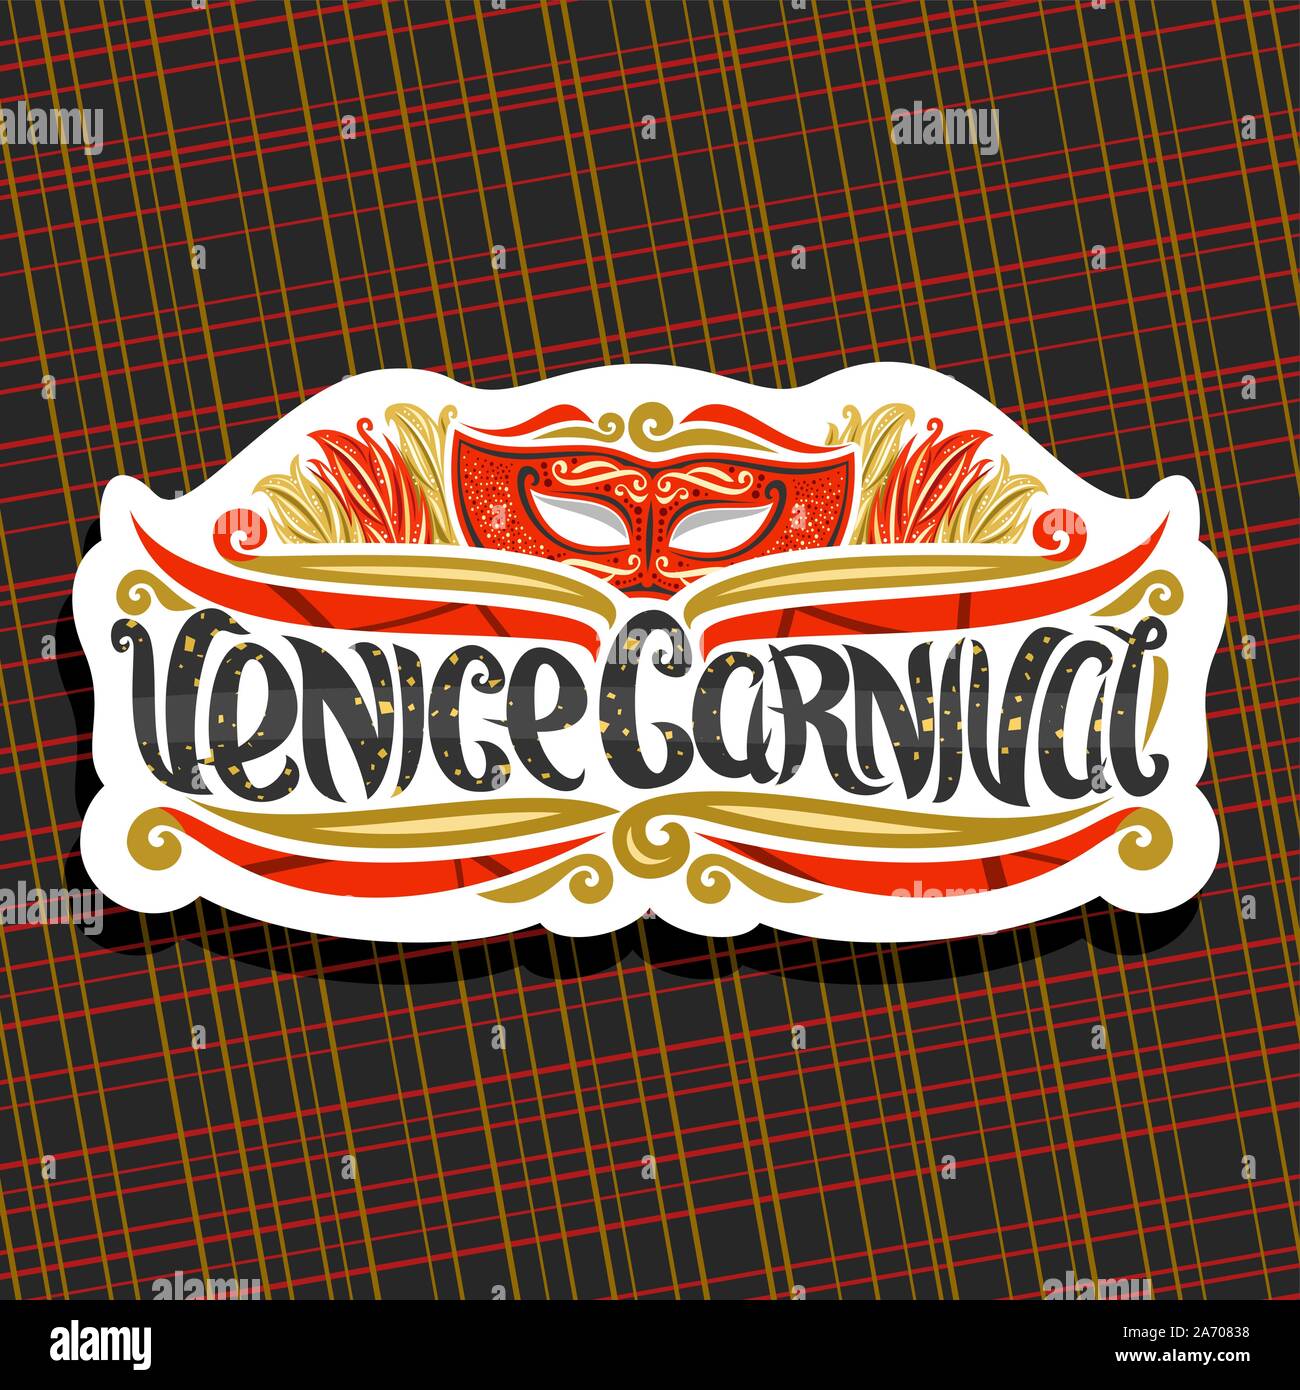 Vector logo for Venice Carnival, cut paper sign with illustration of red masquerade mask, colorful feathers for headdress, elegant handwritten typefac Stock Vector